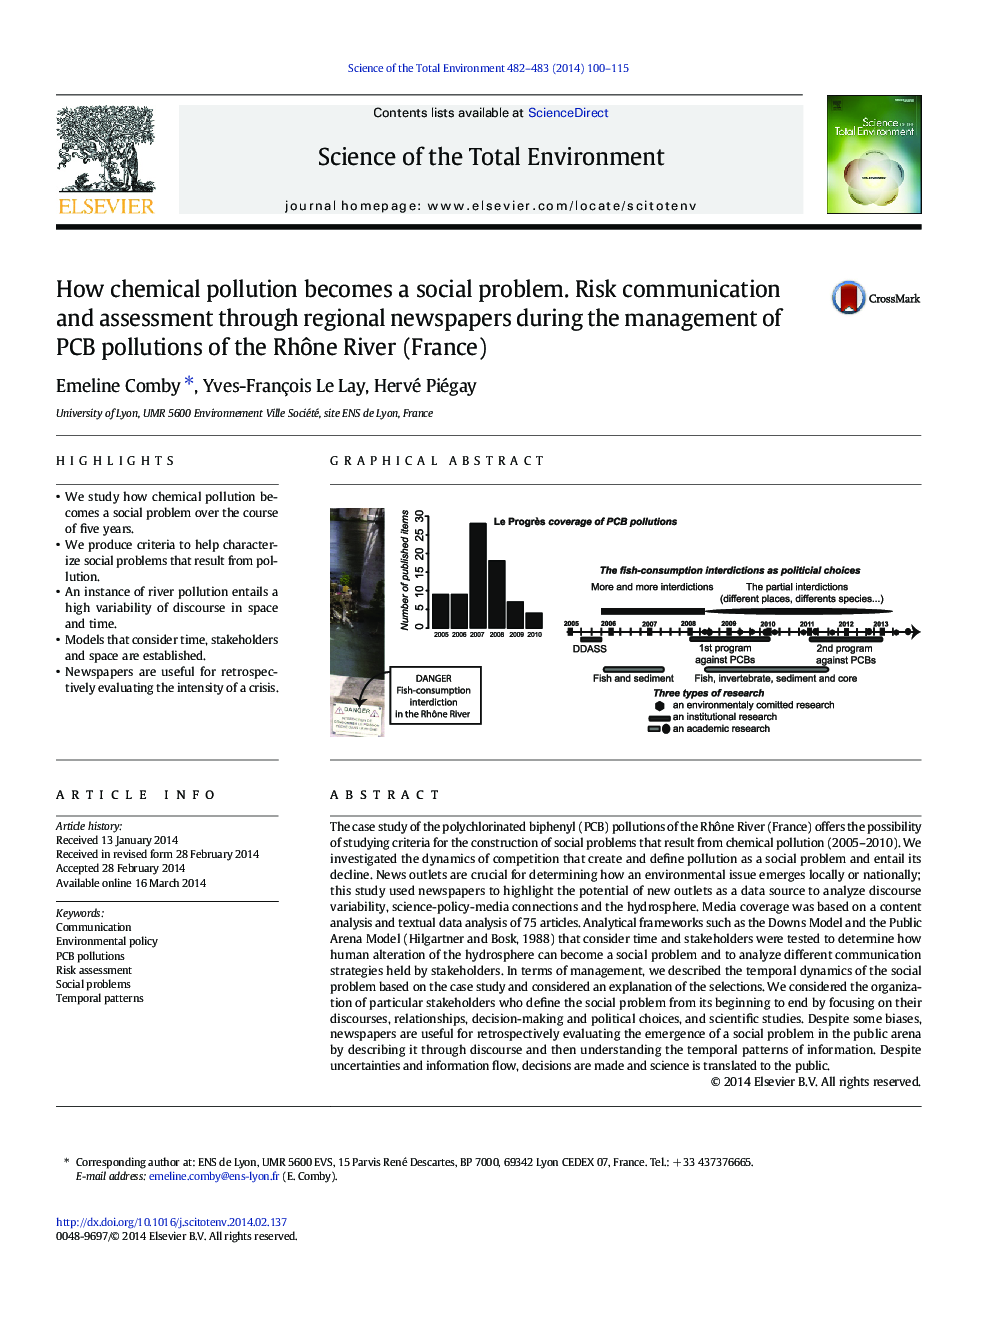 How chemical pollution becomes a social problem. Risk communication and assessment through regional newspapers during the management of PCB pollutions of the RhÃ´ne River (France)